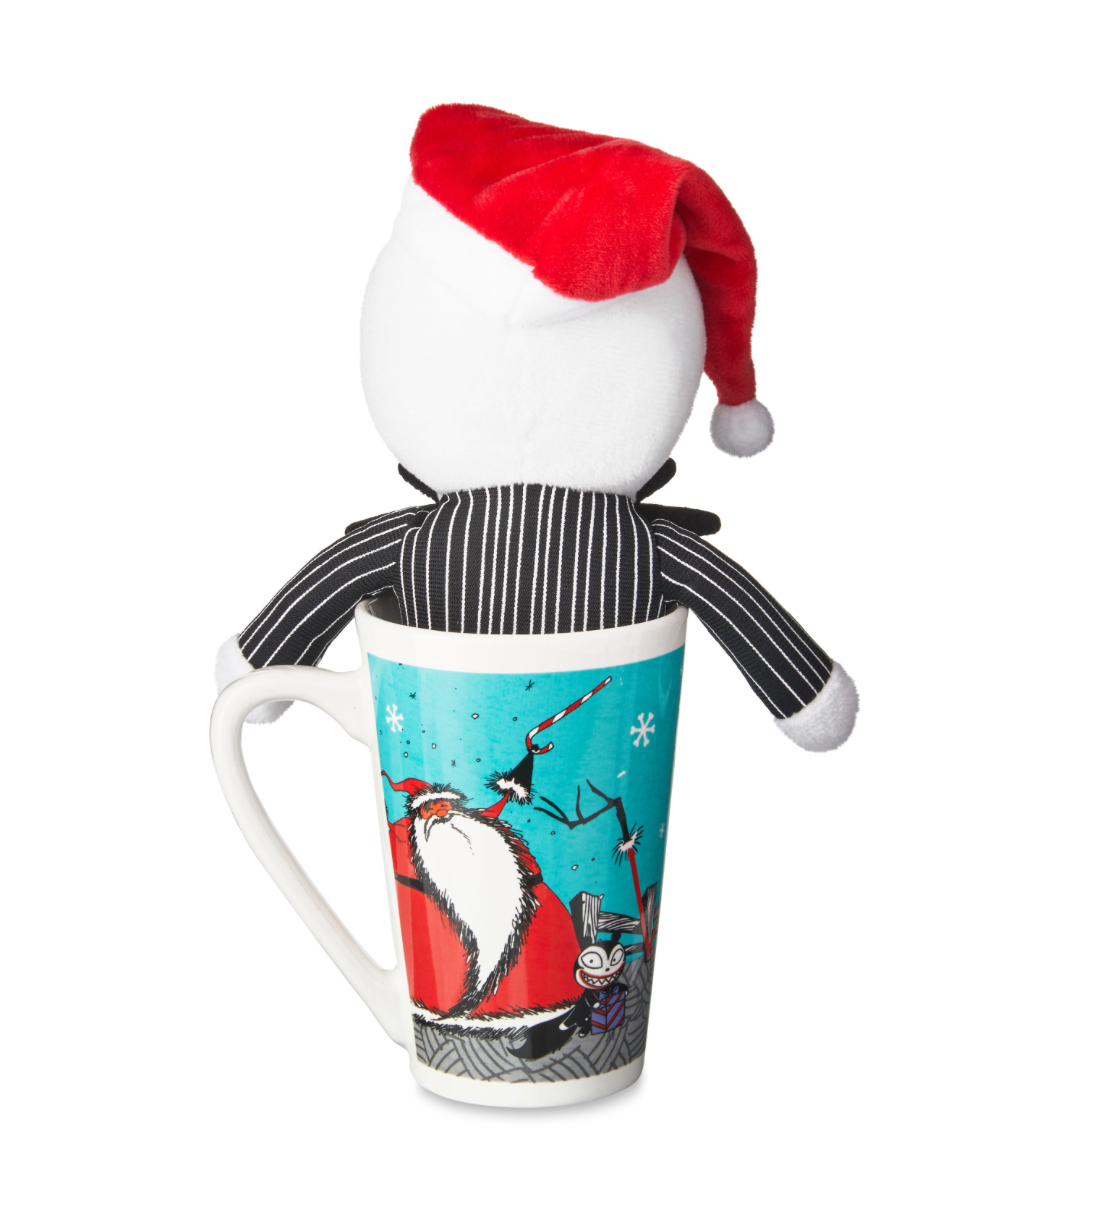 Disney The Nightmare Before Christmas Plush in a Mug Latte Jack Set New with Tag